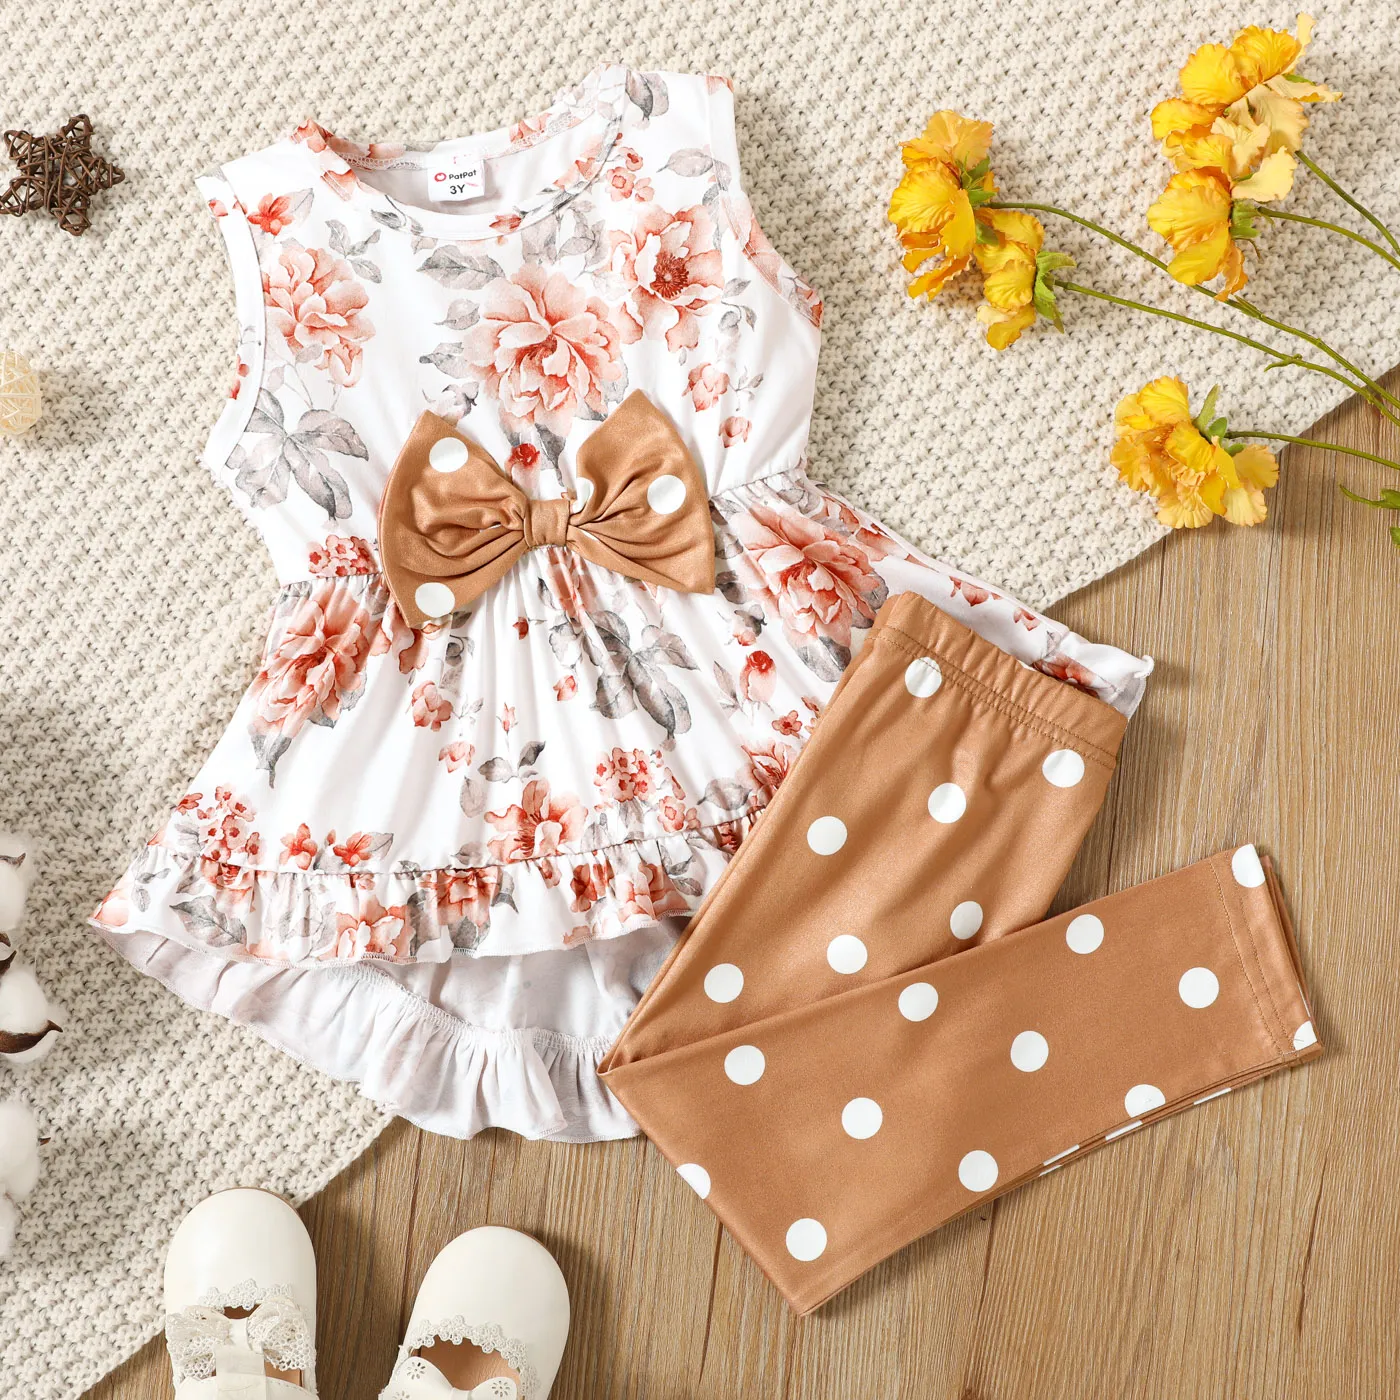 2-piece Toddler Girl Floral Print Bowknot Design Ruffled High Low Sleeveless Tee and Polka dots Pant